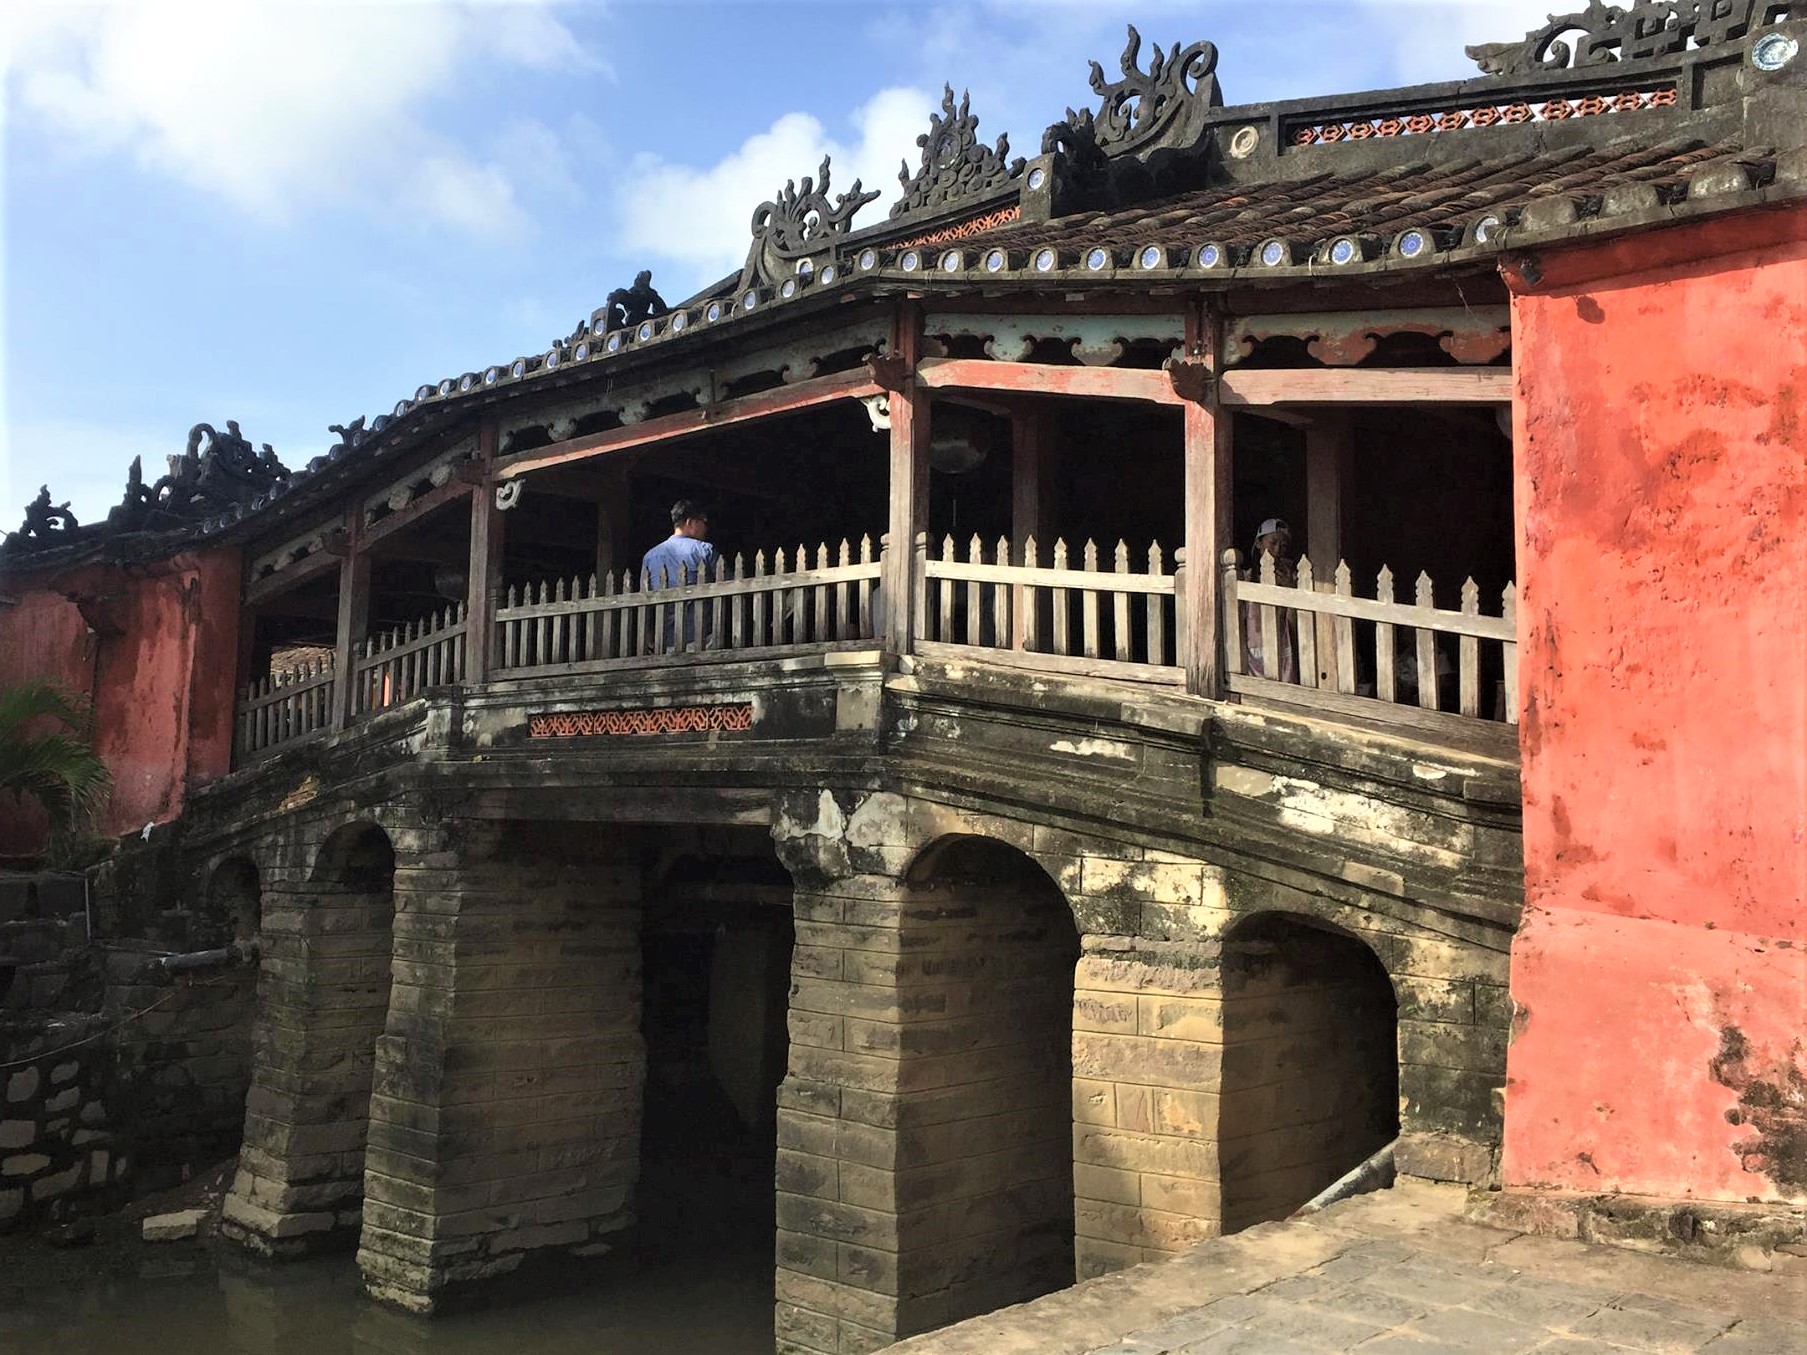 They visited the Japanese Bridge - a must-see place in Hoi An